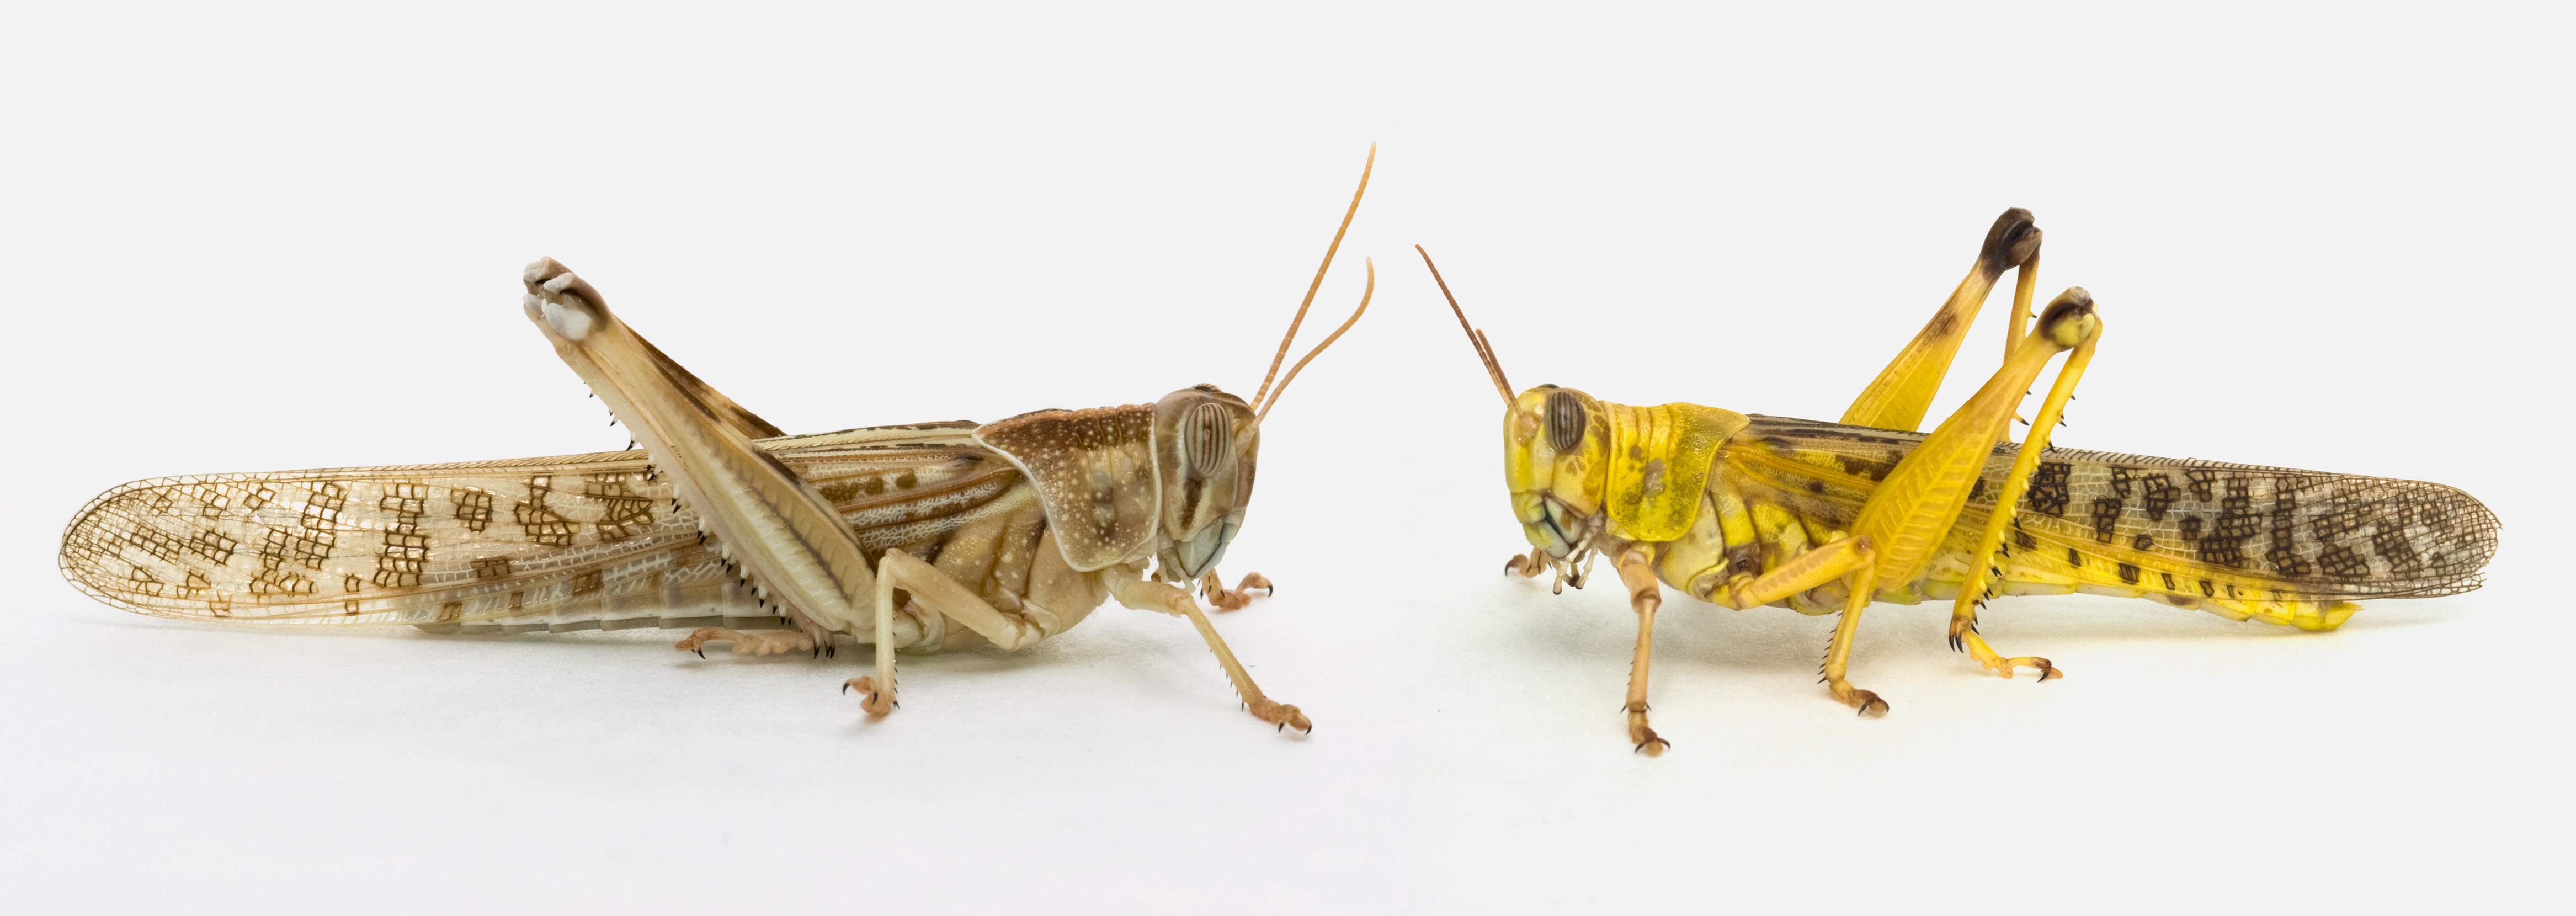 How Locusts Learn to Be Part of a Swarm | WIRED